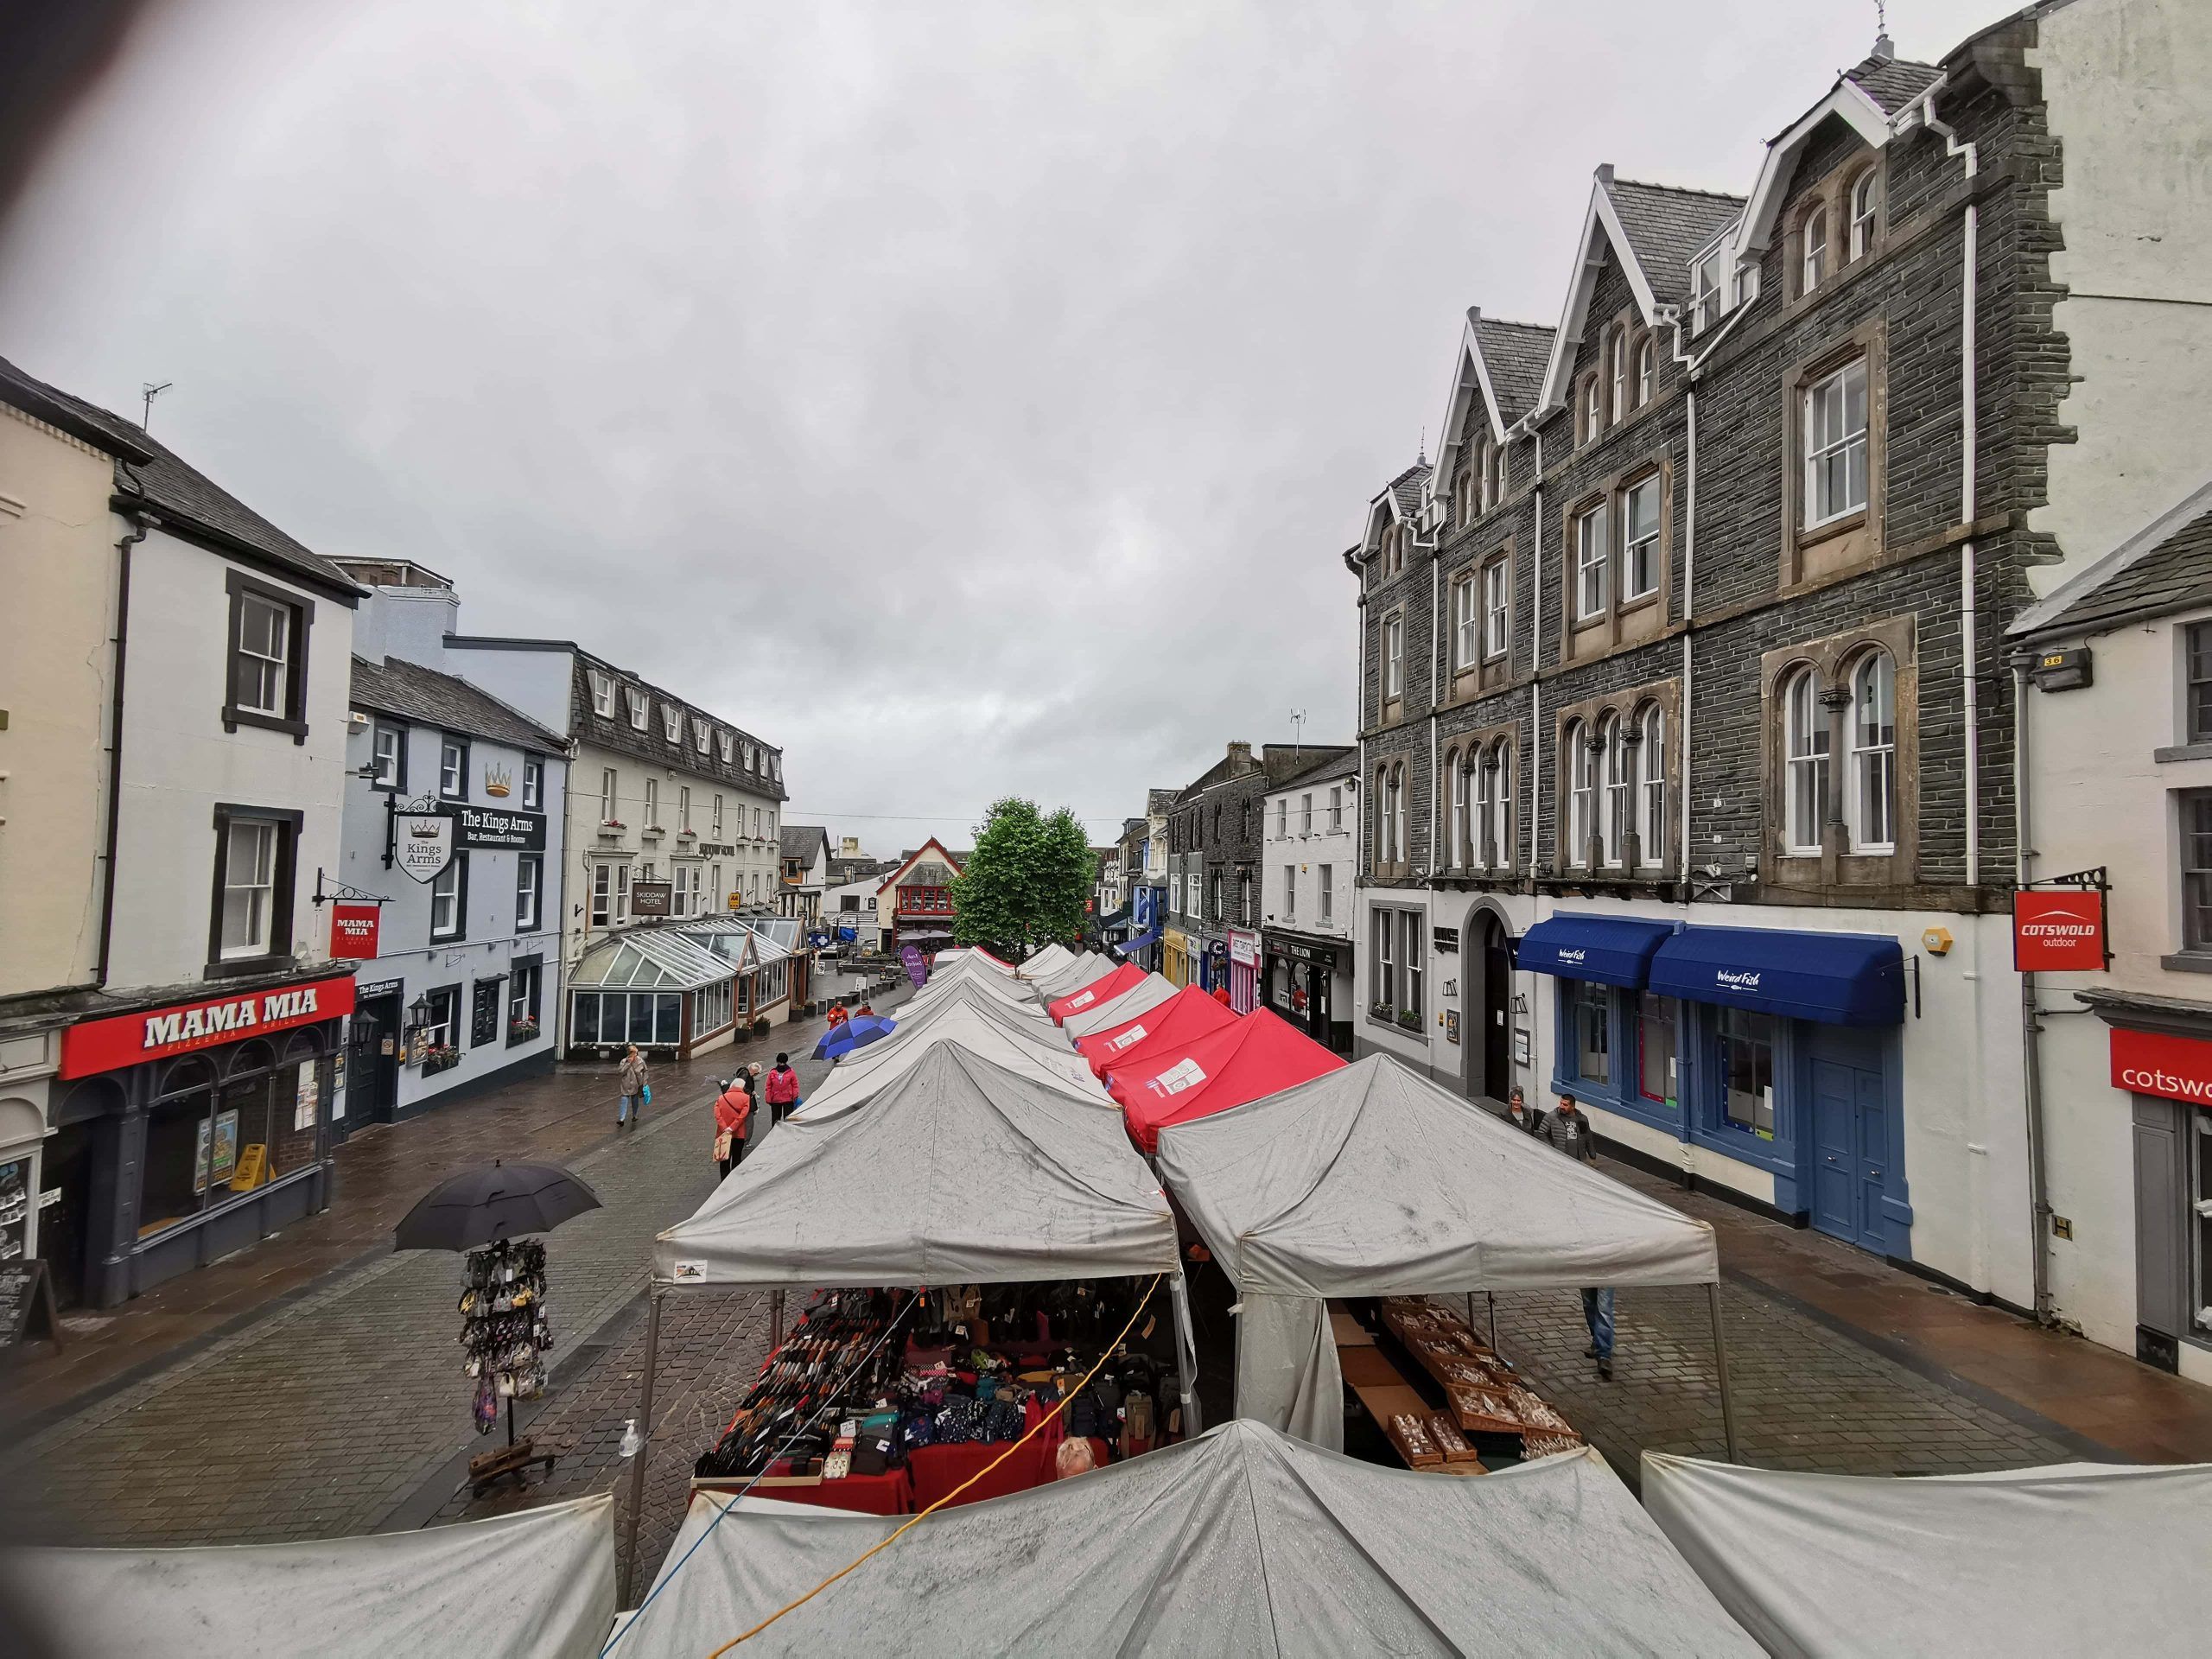 Support grows for Keswick market – The Keswick Reminder